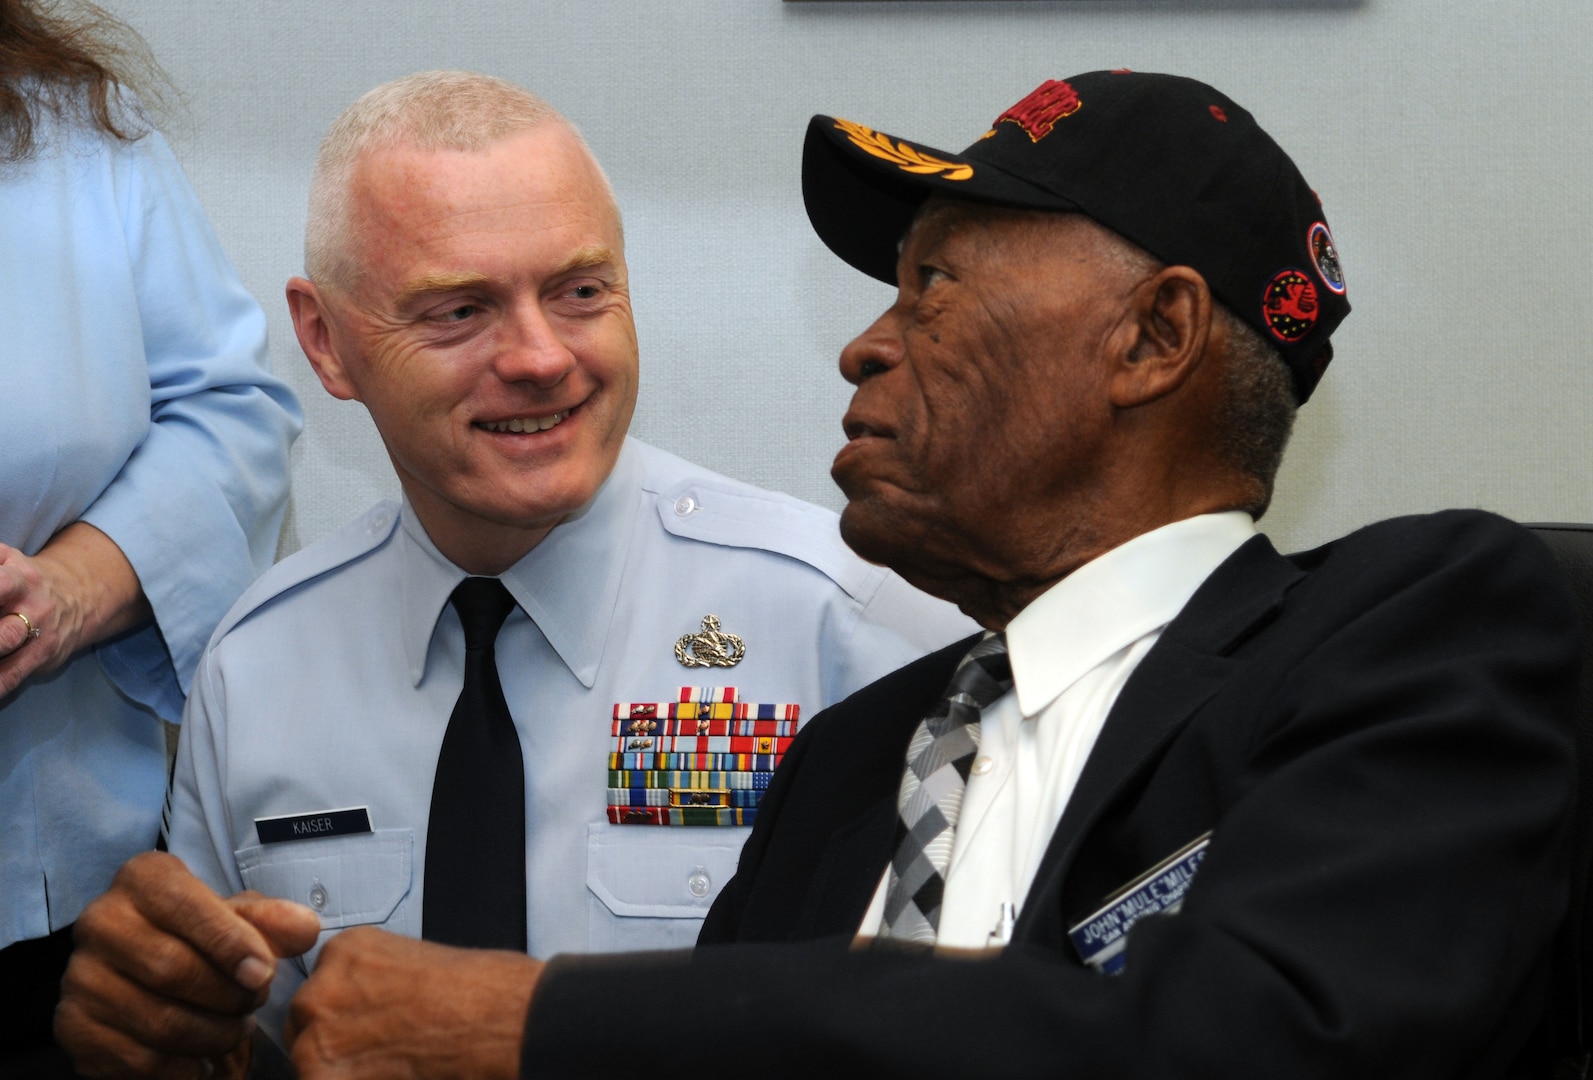 John "Mule" Miles, a Tuskegee Airman aircraft mechanic and former Negro Baseball League Chicago American "Giants" baseball player, speaks with Chief Master Sgt. Andy Kaiser, Air Force Personnel Center command chief master sergeant, during the First Tuskegee Heritage Breakfast Feb. 9 at the 99th Flying Training Squadron. Activated on March 22, 1941, the 99th FTS was originally designated as the 99th Pursuit Squadron, and was better known as the "Tuskegee Airmen," the first all-black unit in the U.S. Army Air Corps. (U.S. Air Force photo by Rich McFadden)